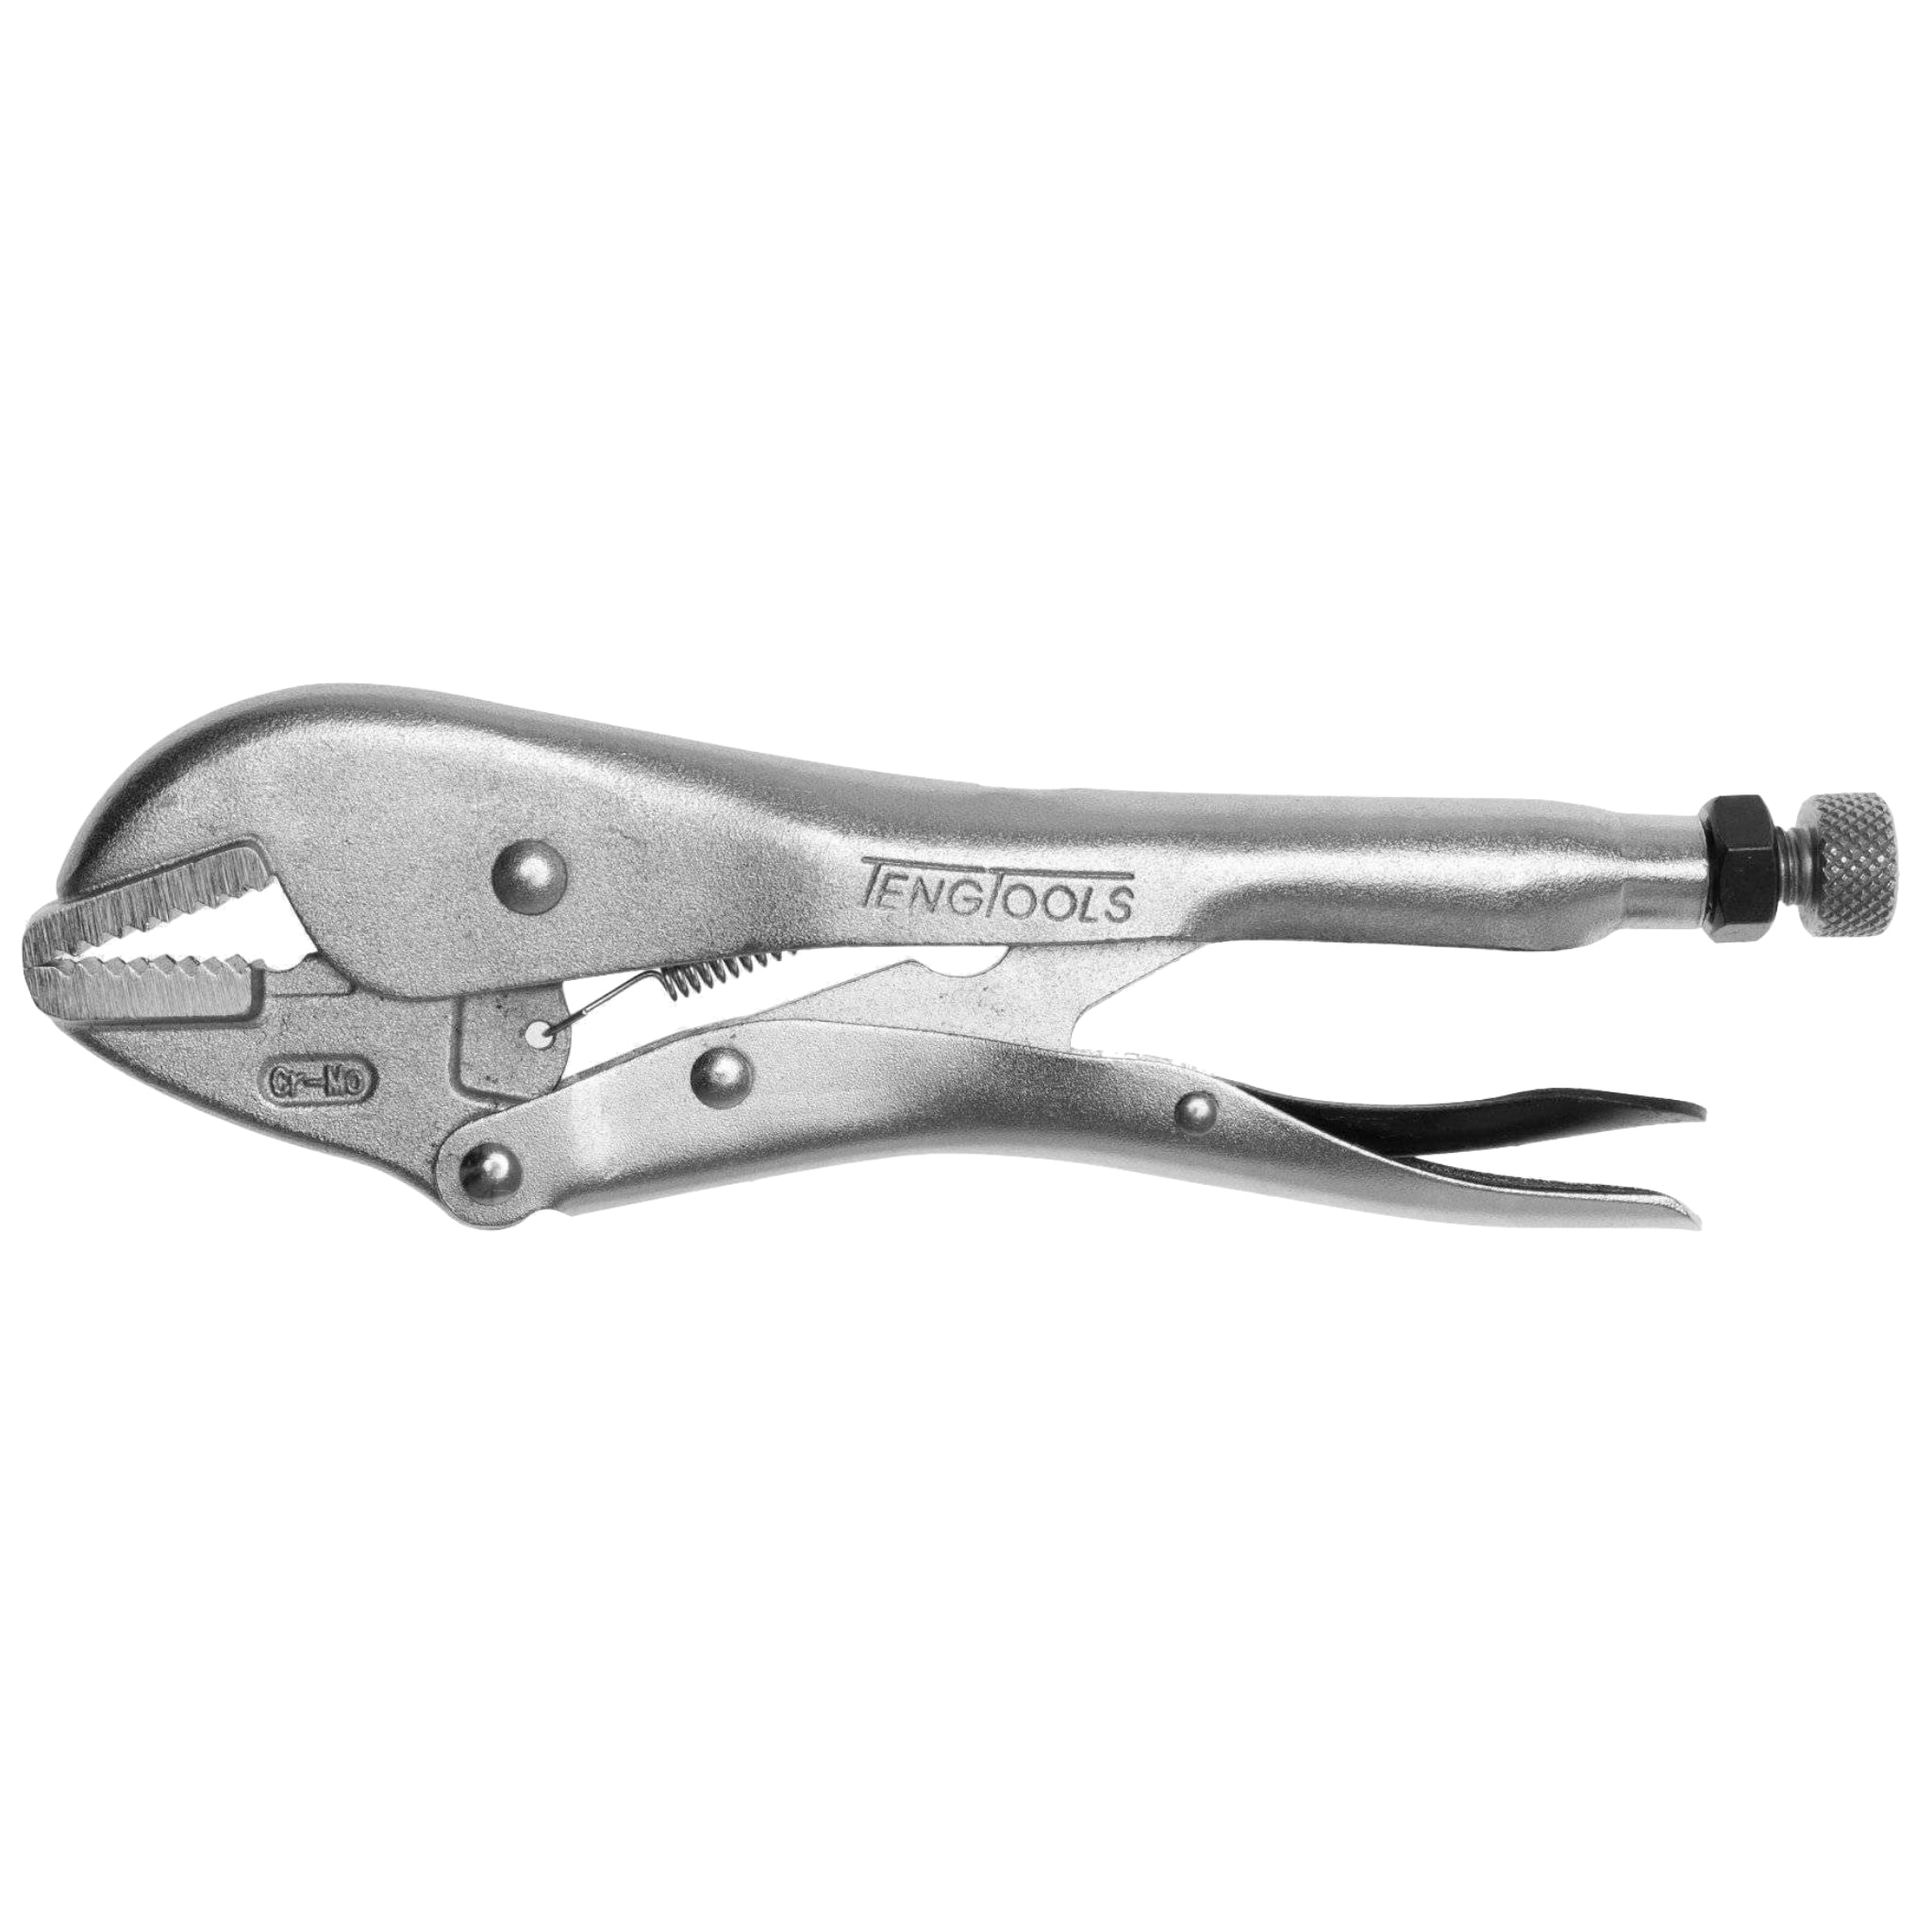 Teng Tools 10 And 12 Inch Flat Jaw Power Vise Grip Locking Pliers - 12 Inch